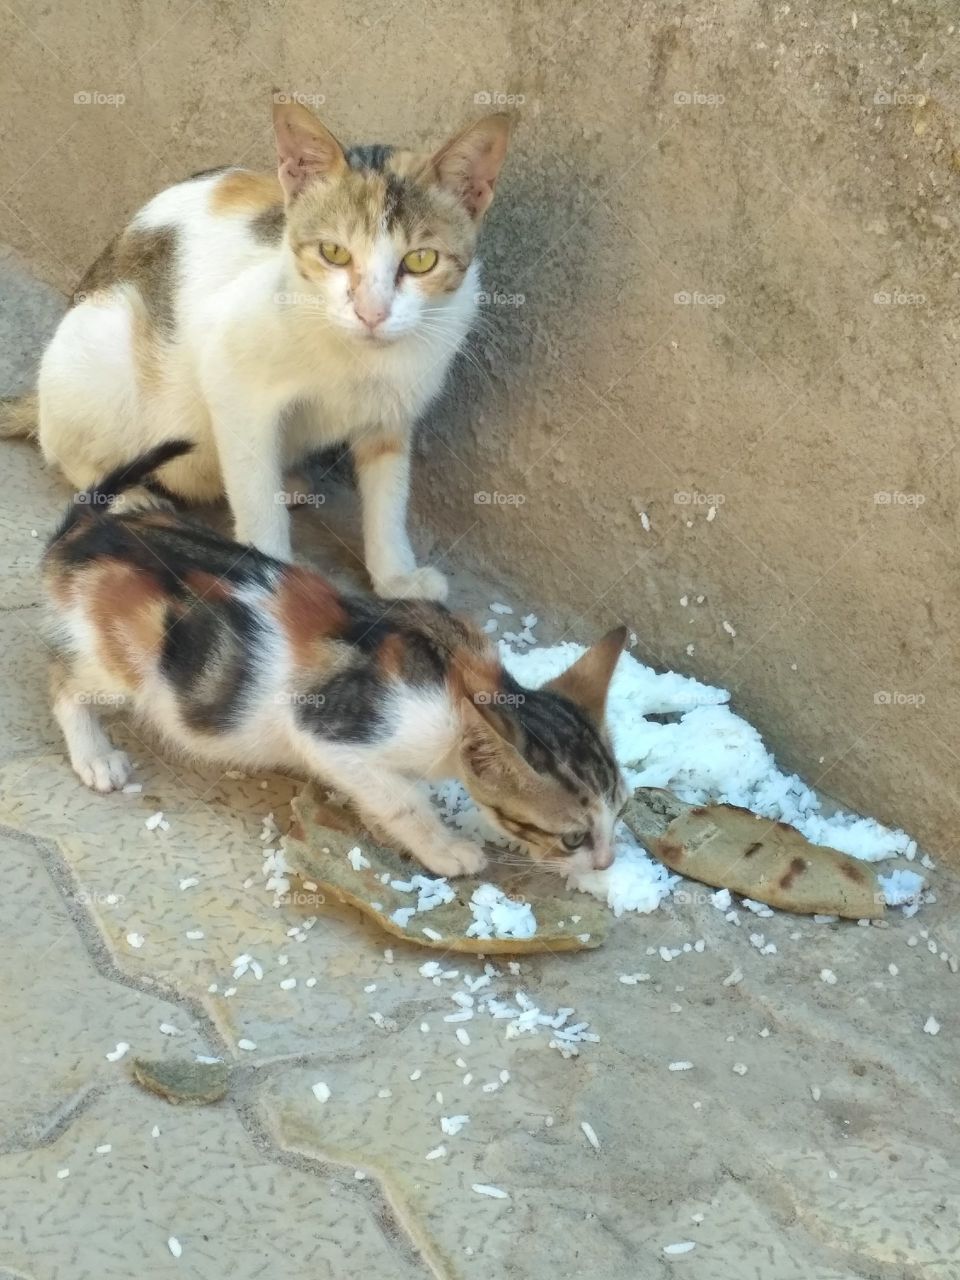 cat eating with child